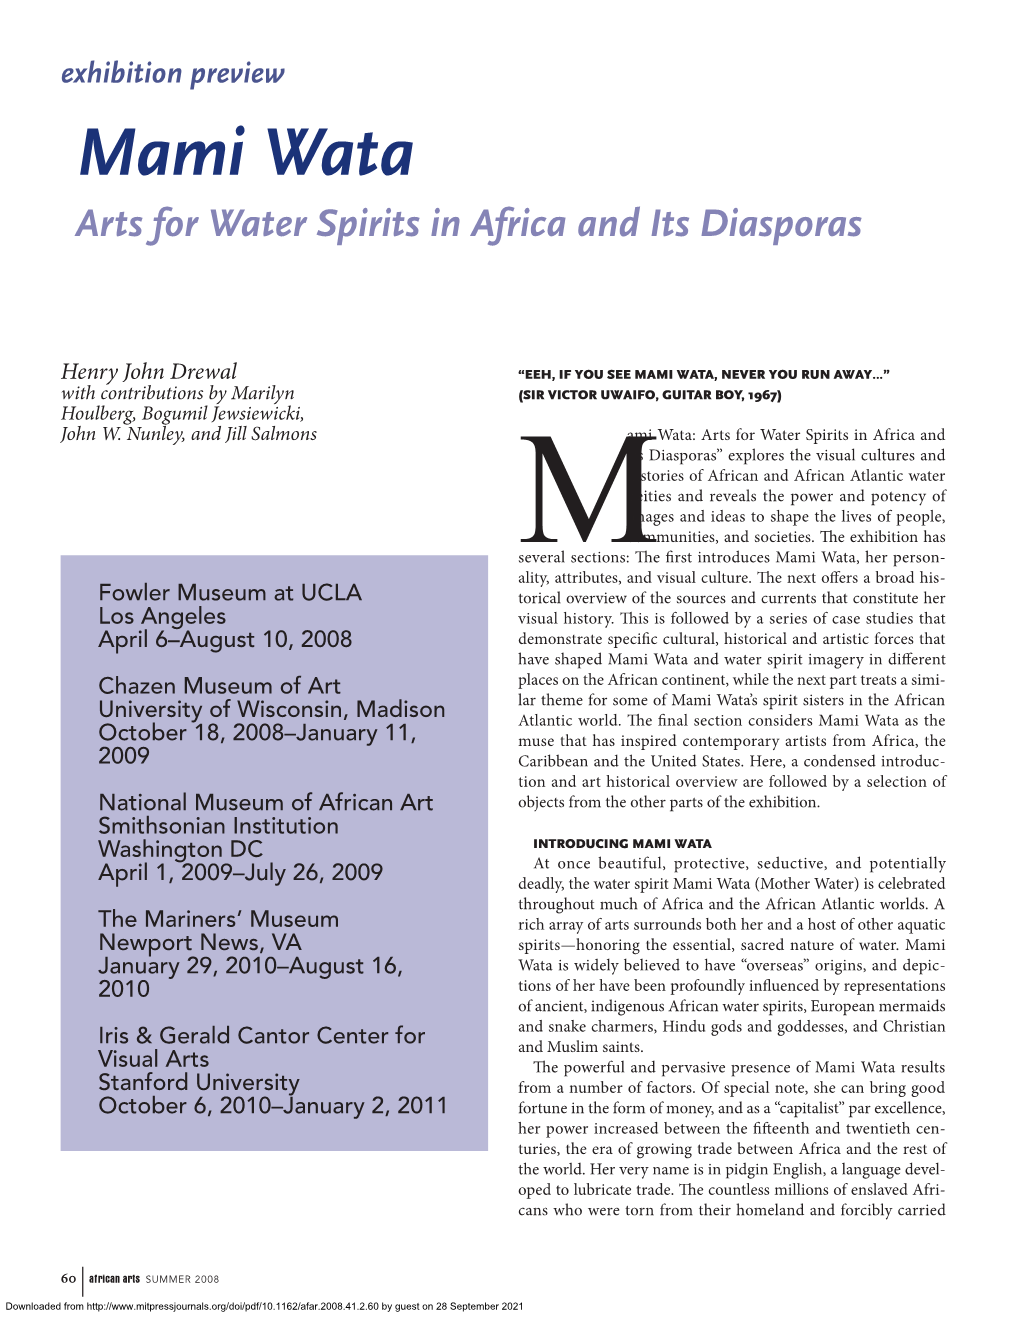 Mami Wata Arts for Water Spirits in Africa and Its Diasporas